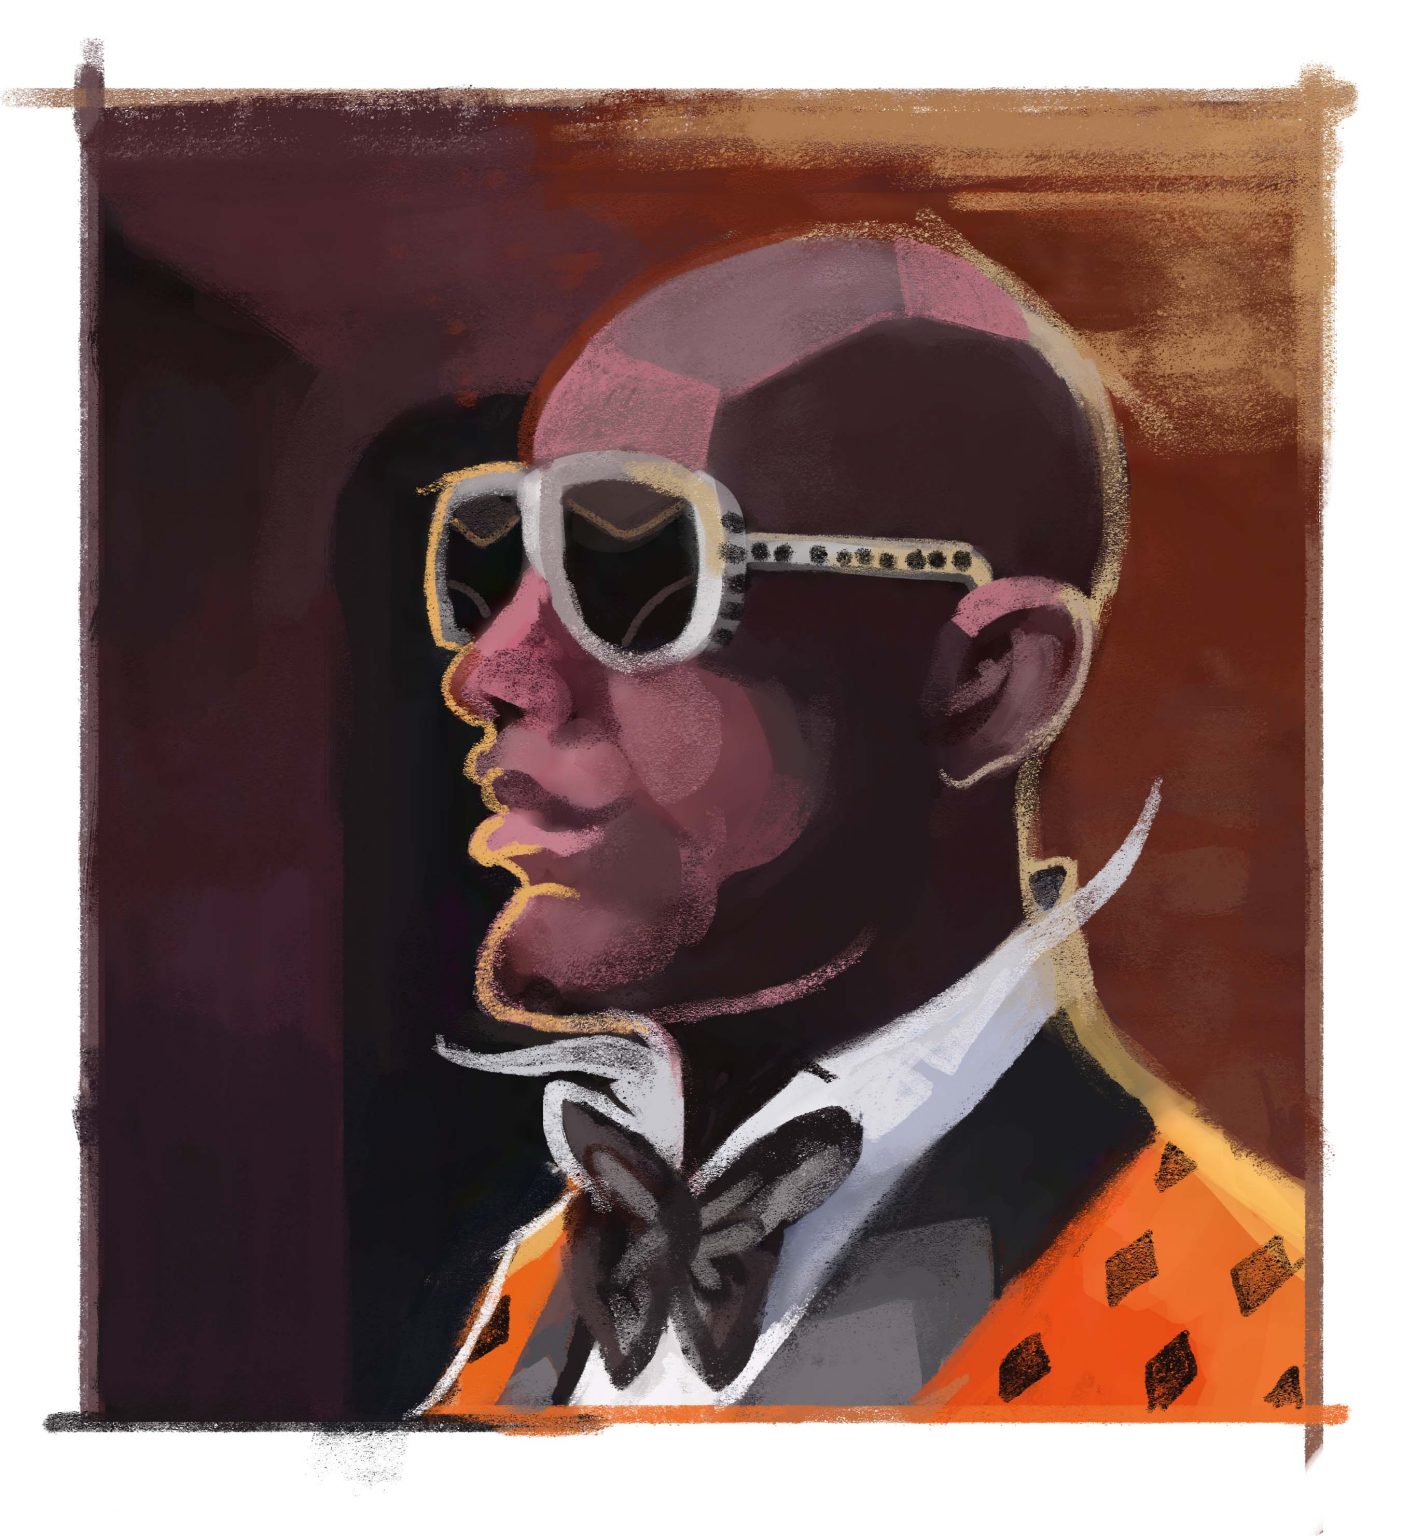 TIL of Dapper Dan, a Harlem man who was chief tailor to a number